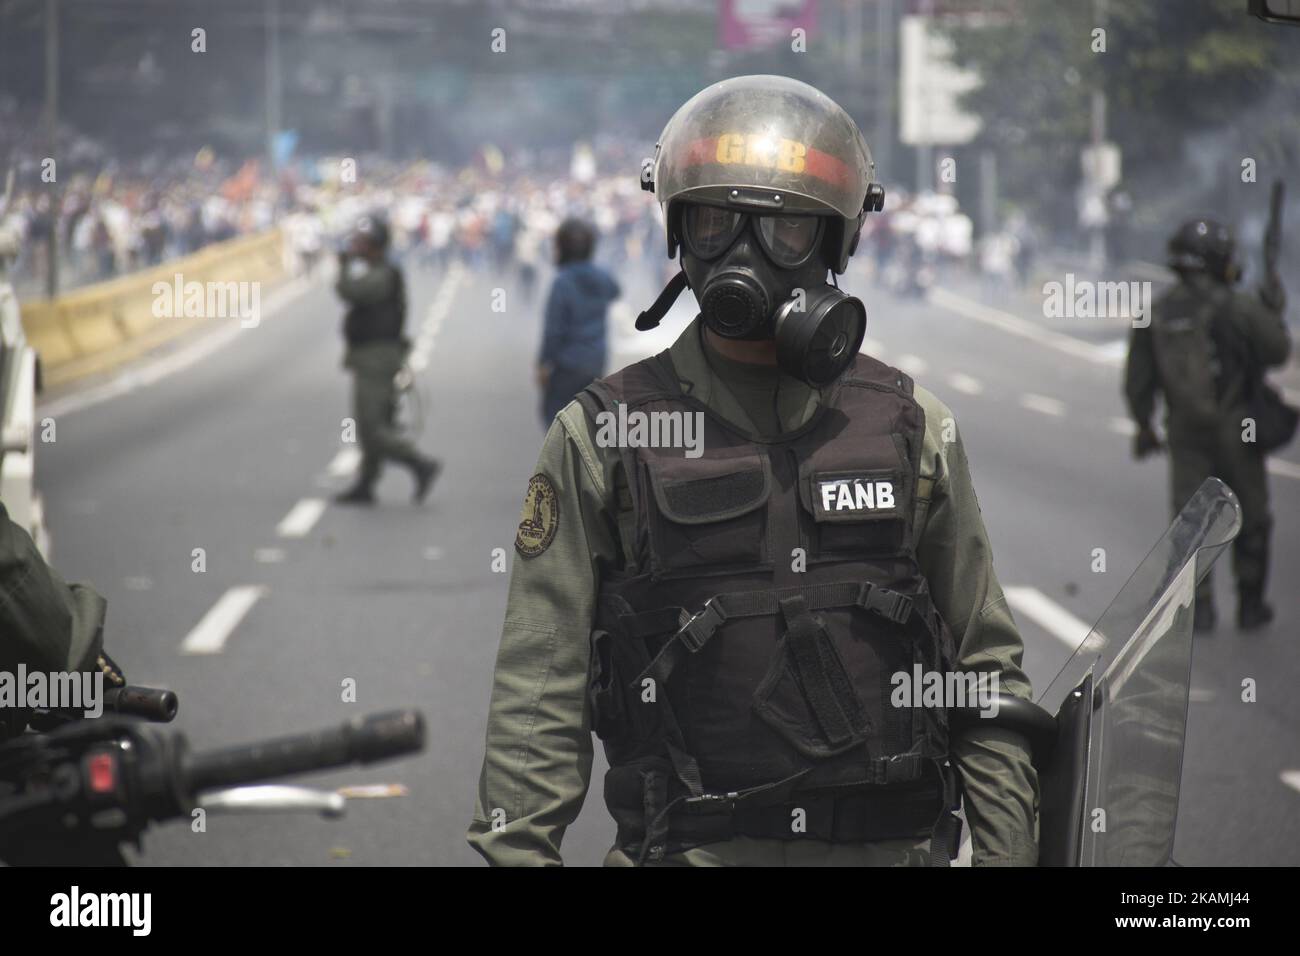 A member of FANB (Fuerzas Armadas de Venezuela) during a march against Venezuelan President Nicolas Maduro, in Caracas on April 19, 2017. Venezuelans took to the streets Wednesday for massive demonstrations for and against President Nicolas Maduro, whose push to tighten his grip on power has triggered deadly unrest that has escalated the country's political and economic crisis. (Photo by Richard Gonzalez/NurPhoto) *** Please Use Credit from Credit Field *** Stock Photo